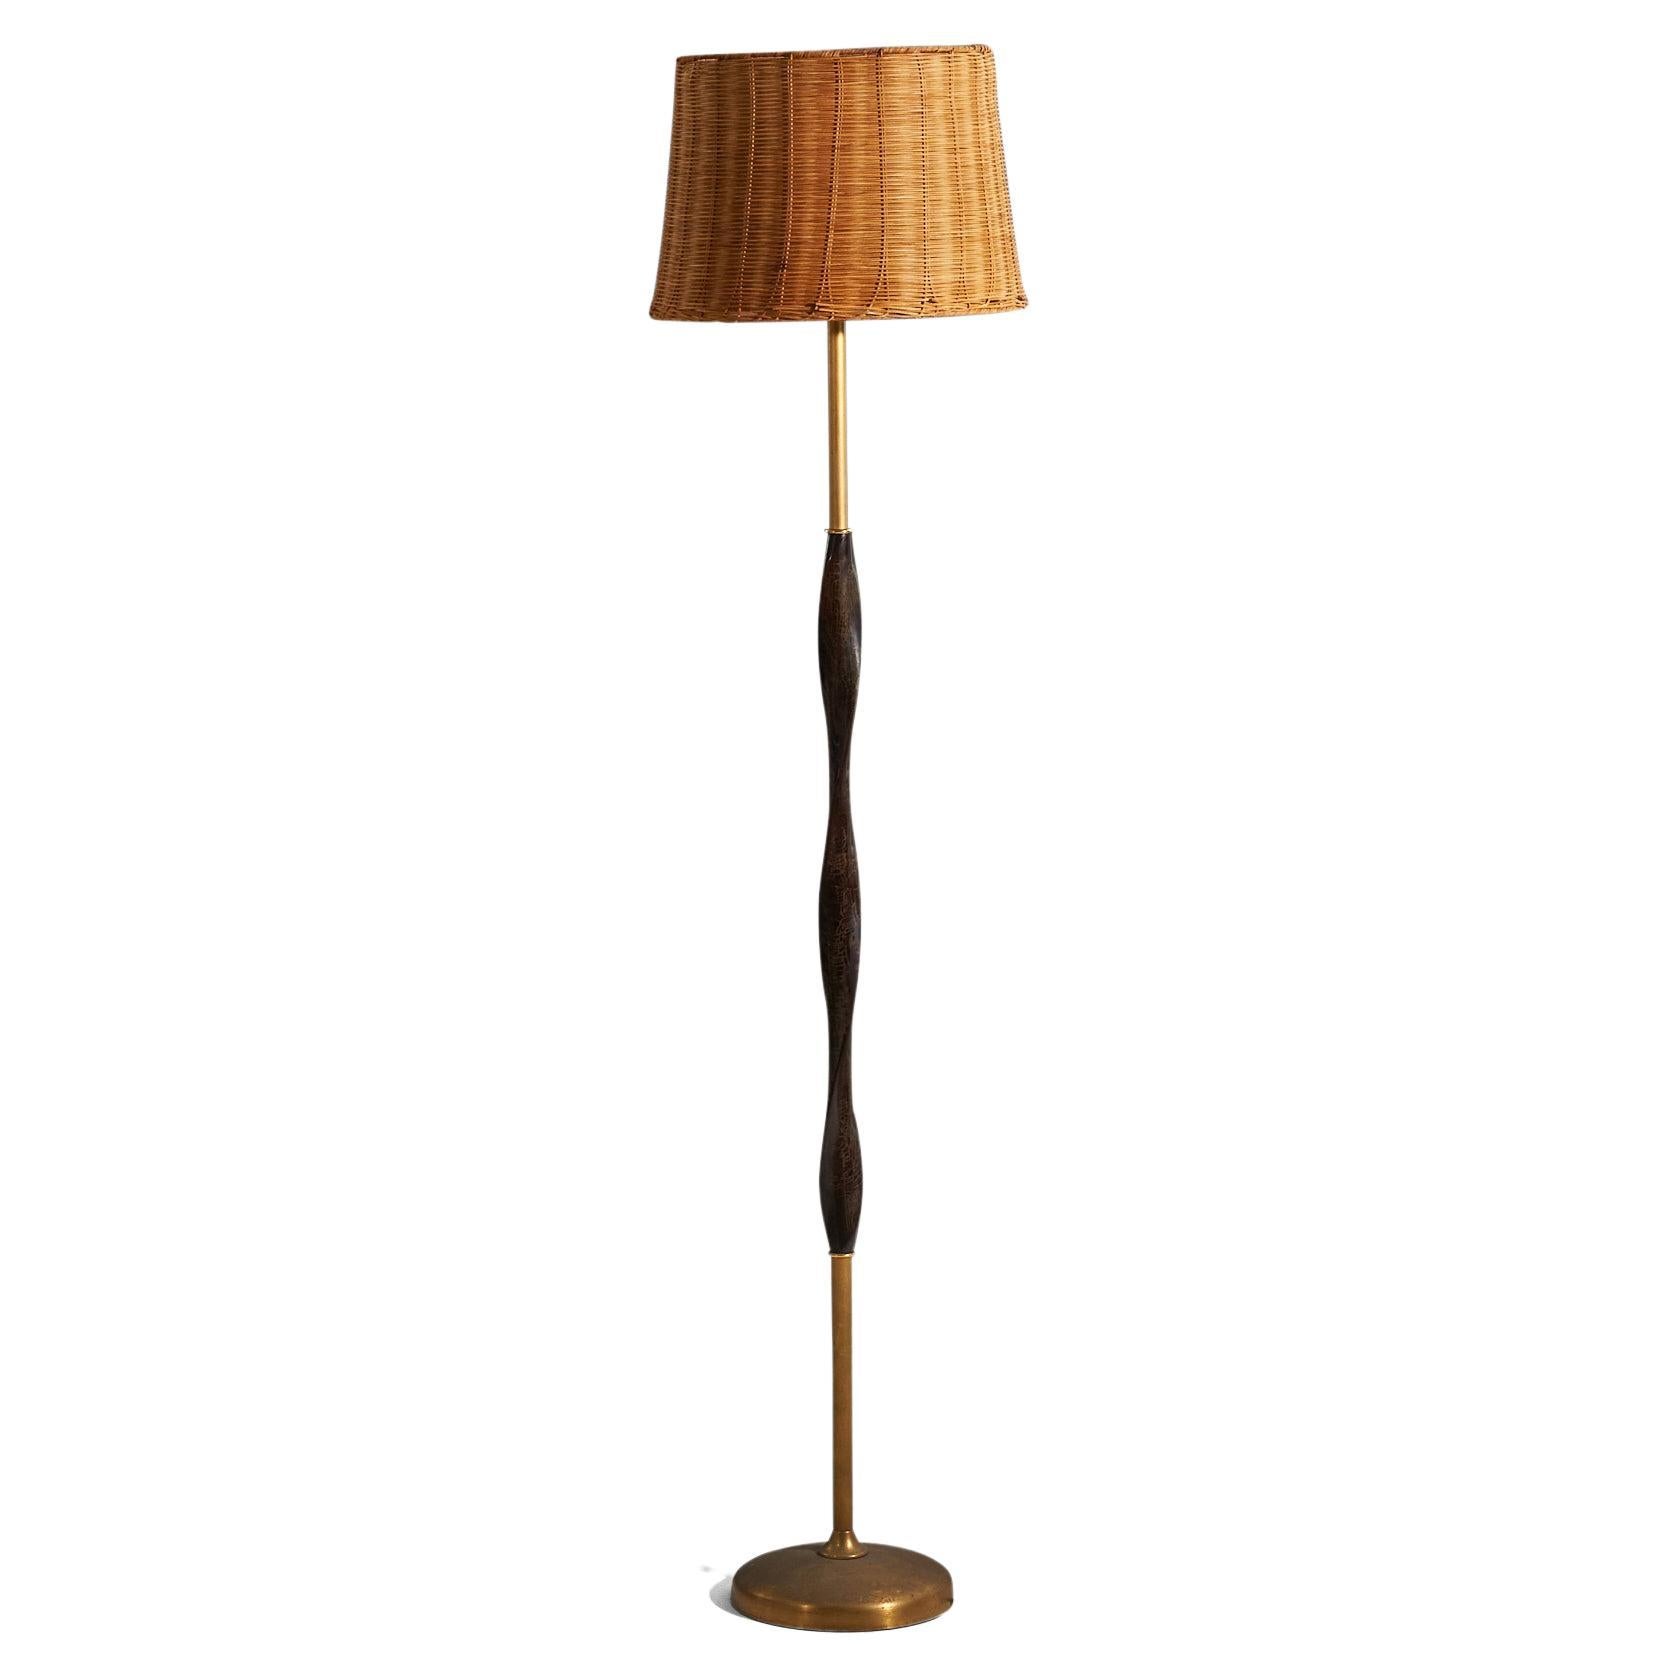 Lumi Milano, Stehlampe, Messing, Holz, Rattan, Mailand, 1940er Jahre